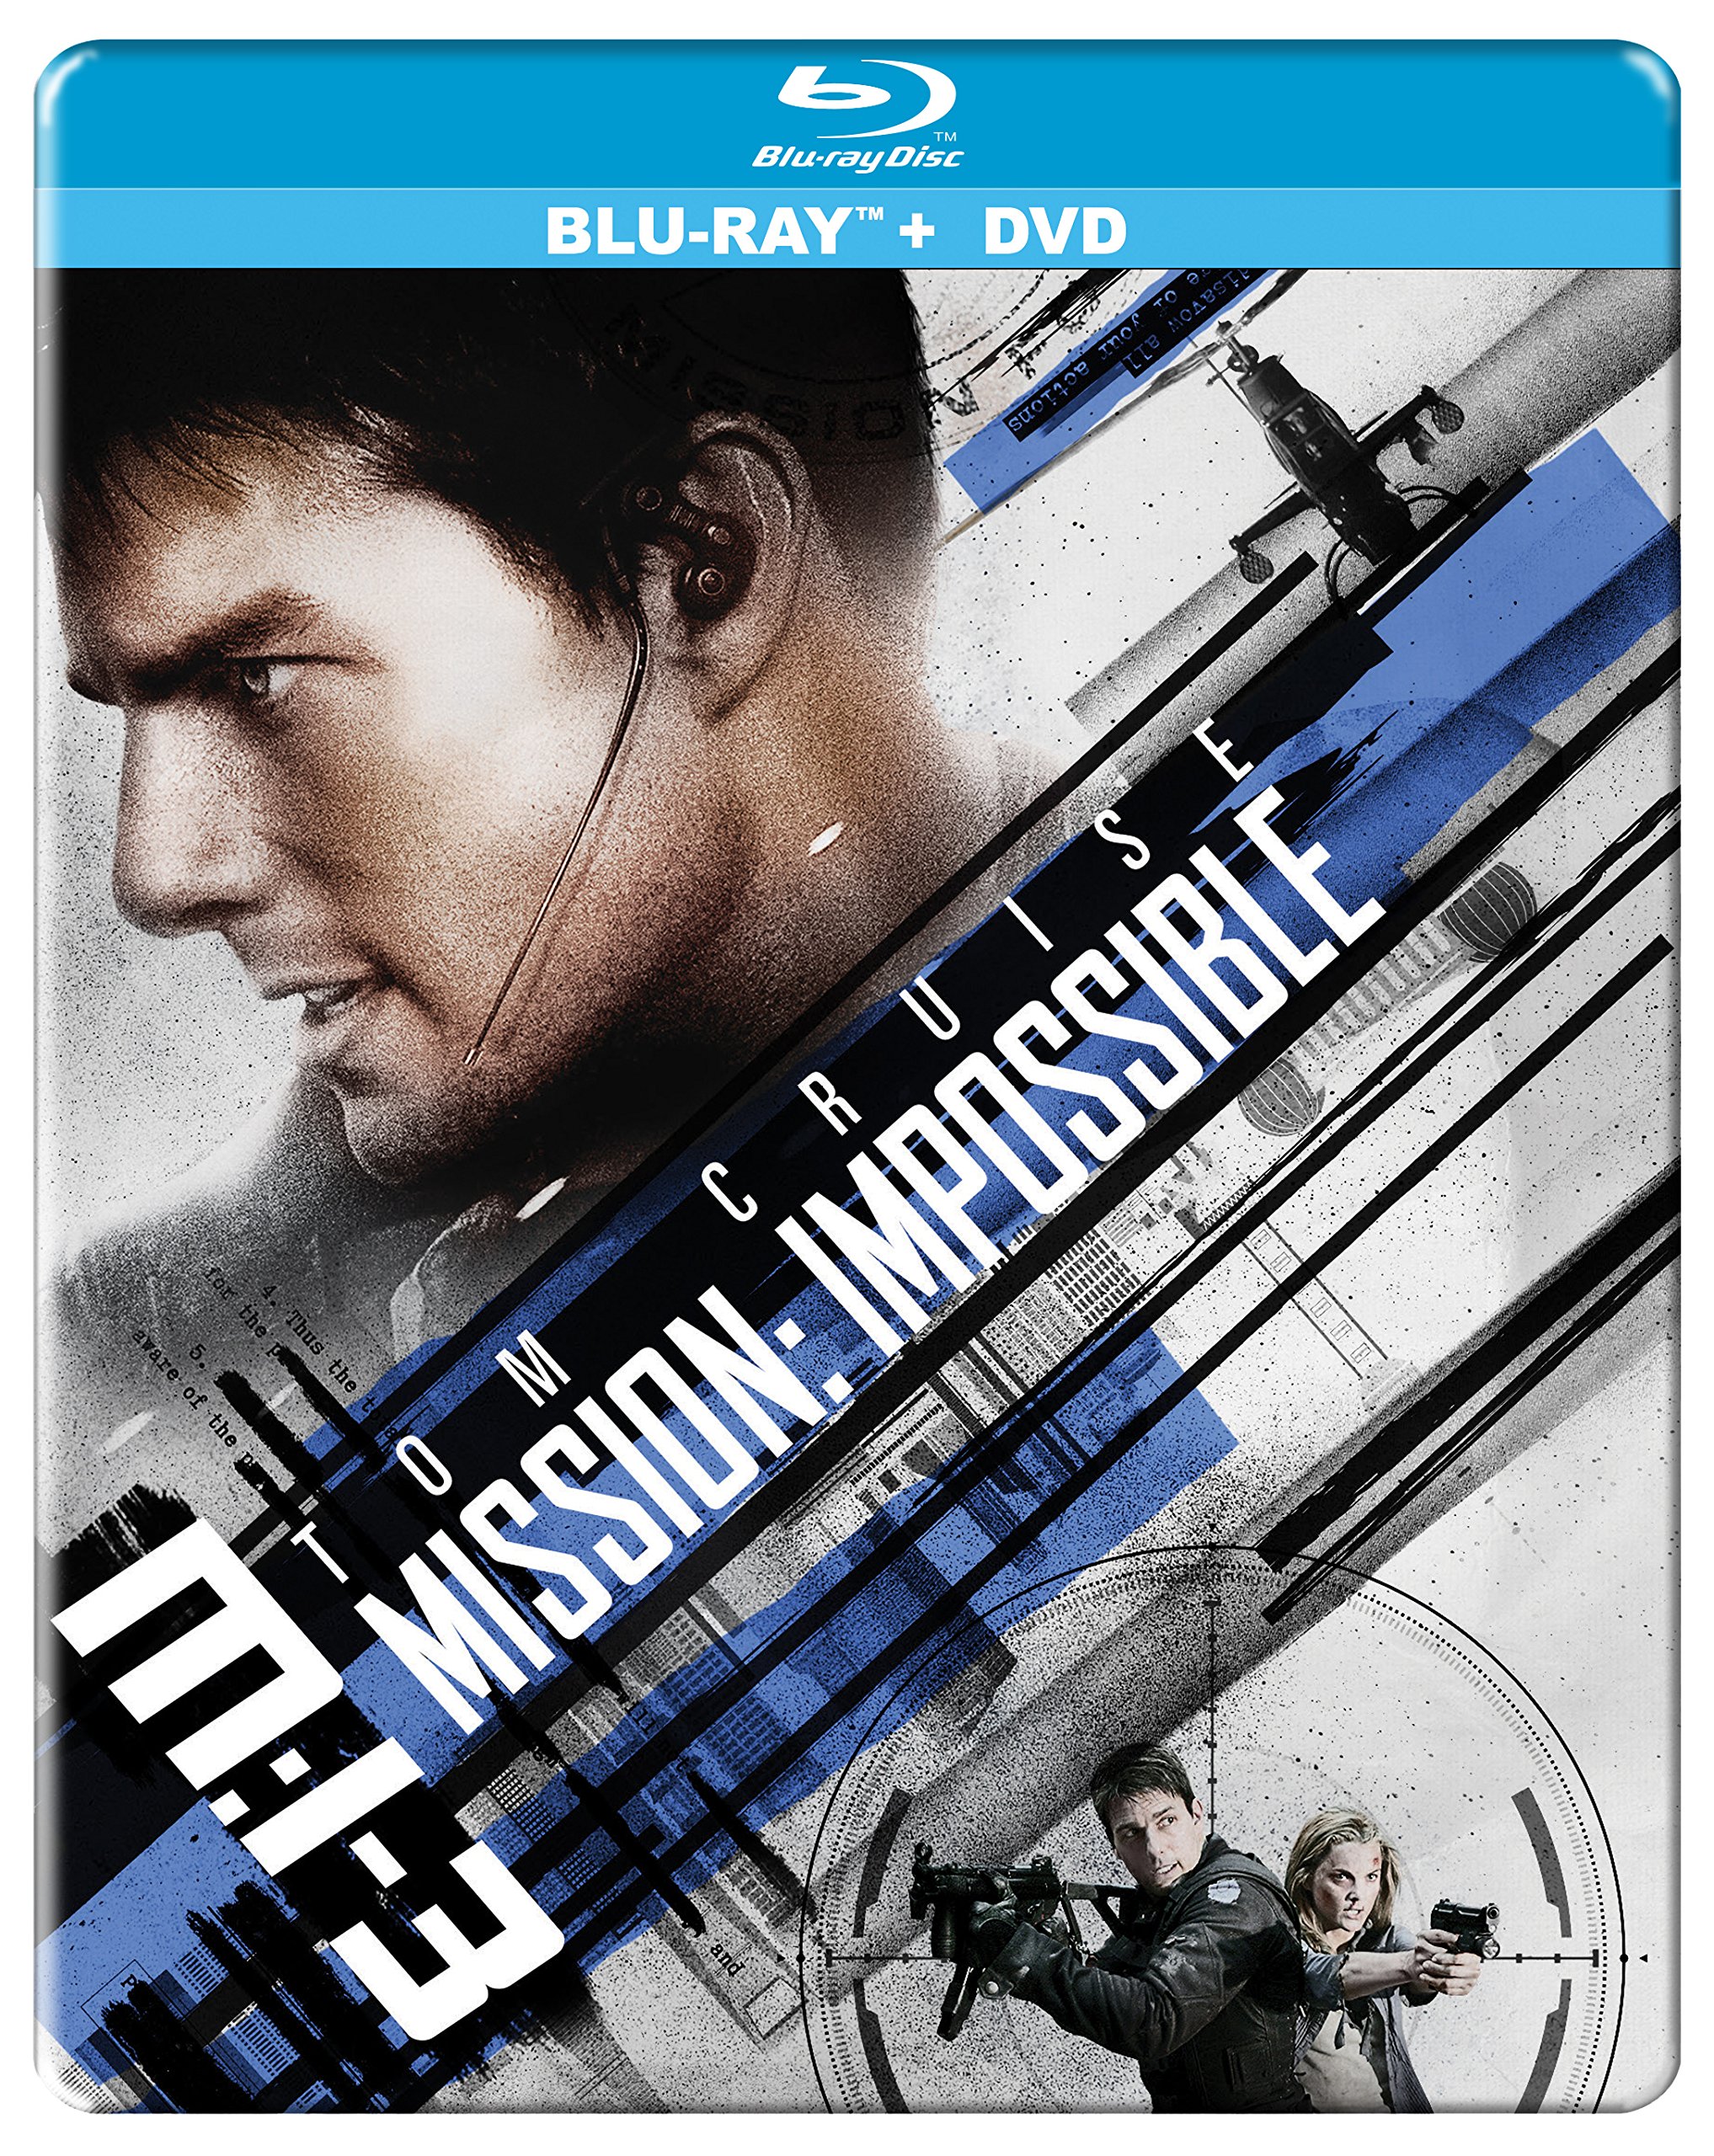 mission-impossible-3-steelbook-movie-purchase-or-watch-online